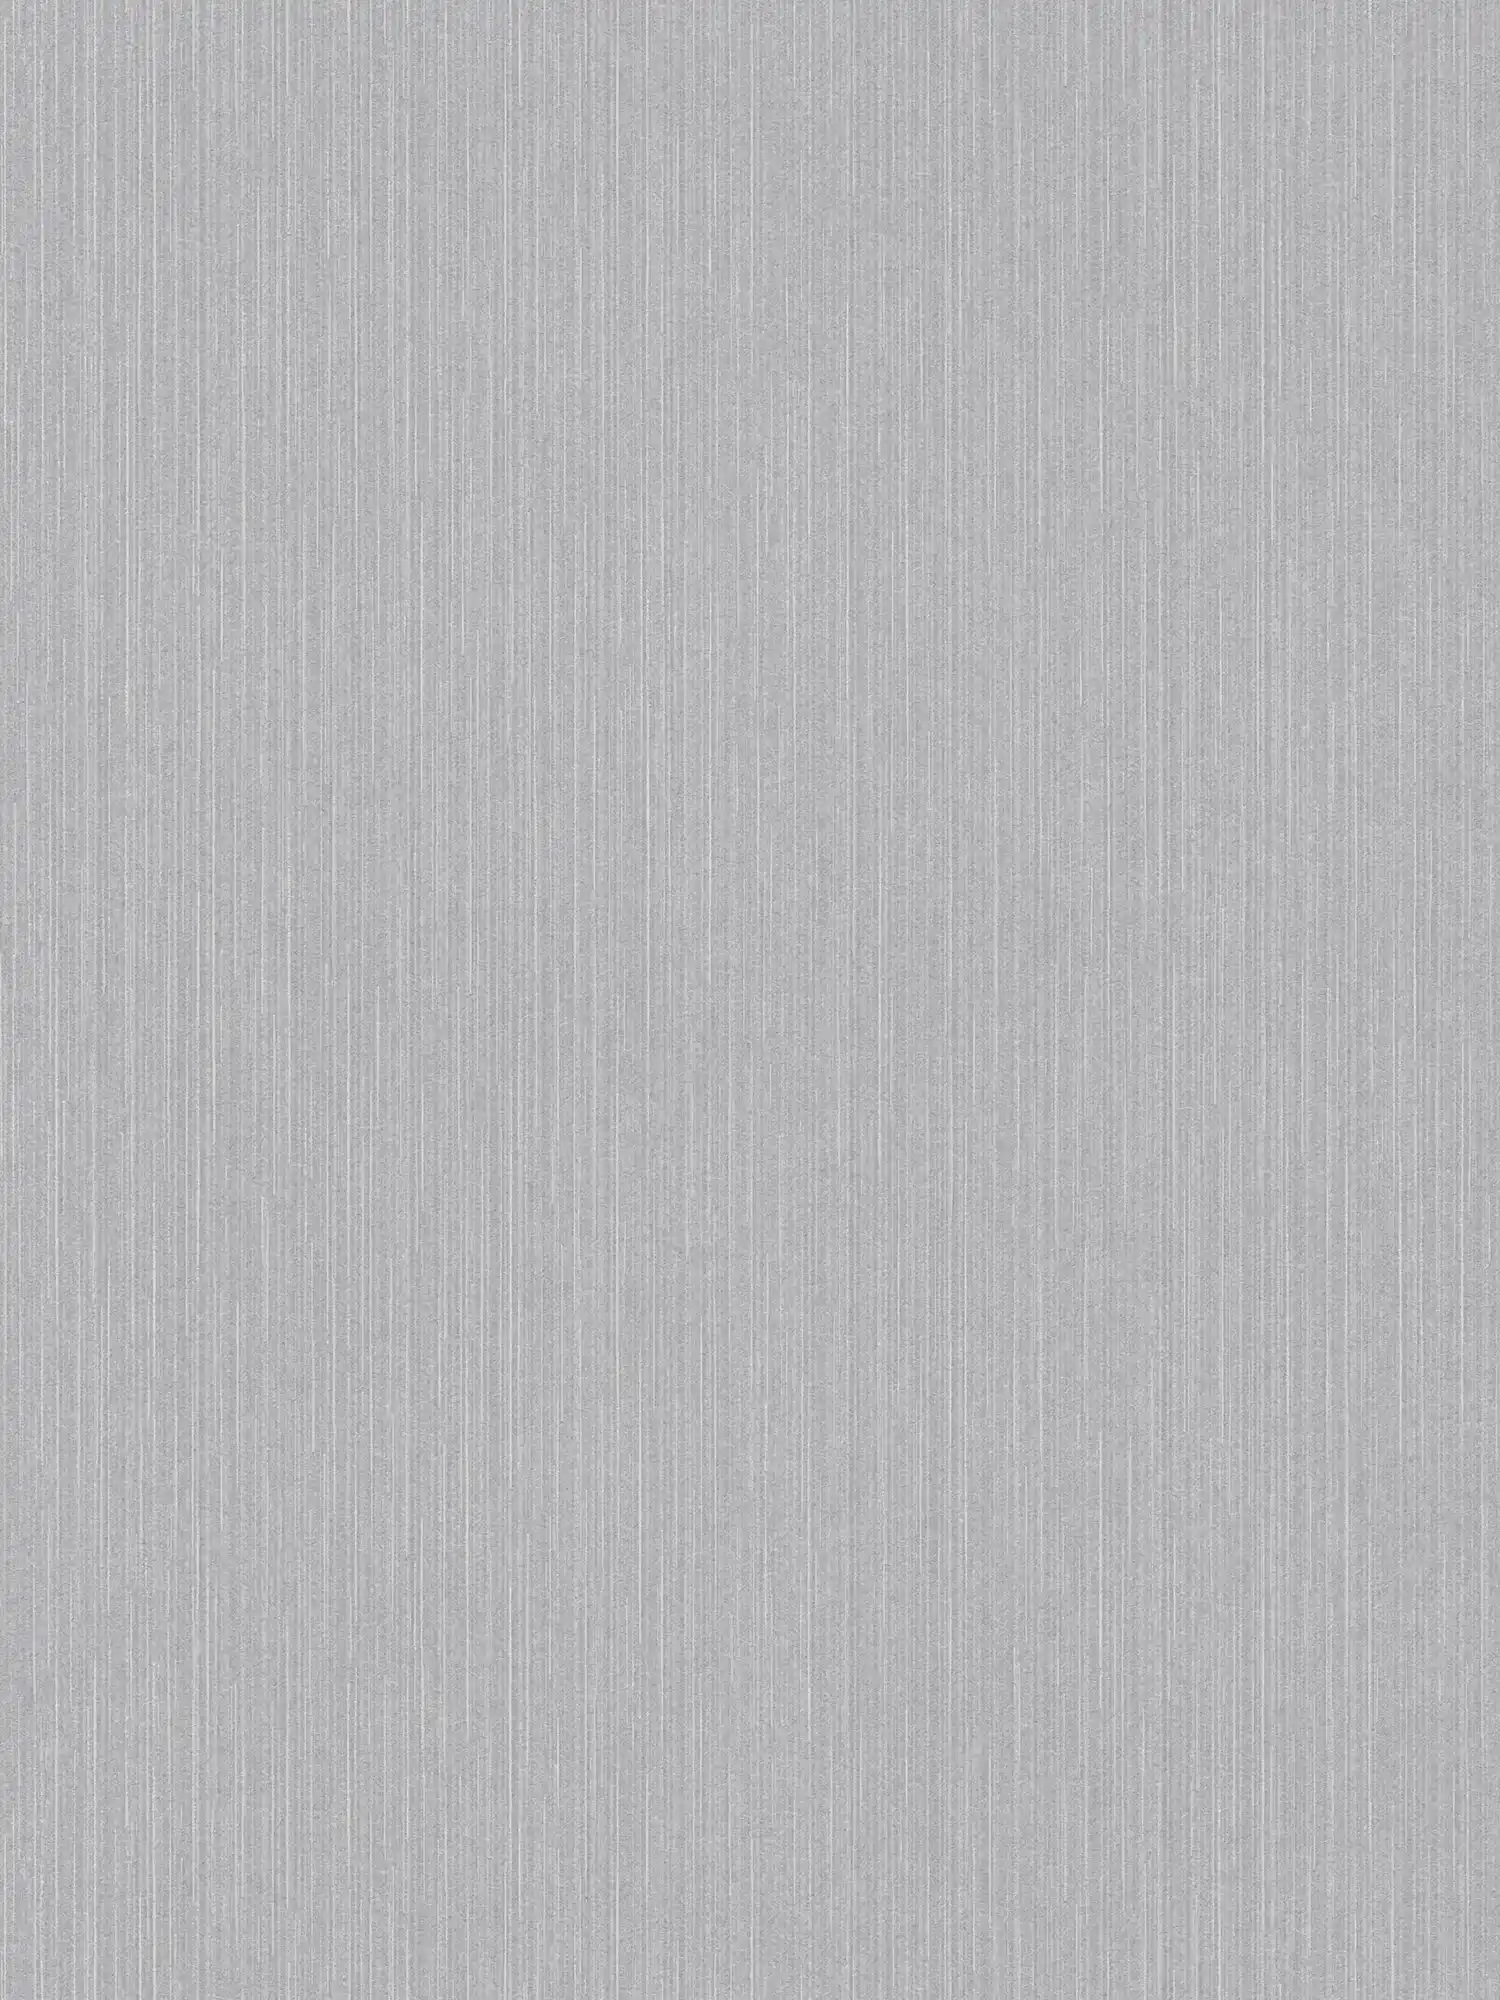         Light grey non-woven wallpaper with glossy effect & lined pattern - grey
    